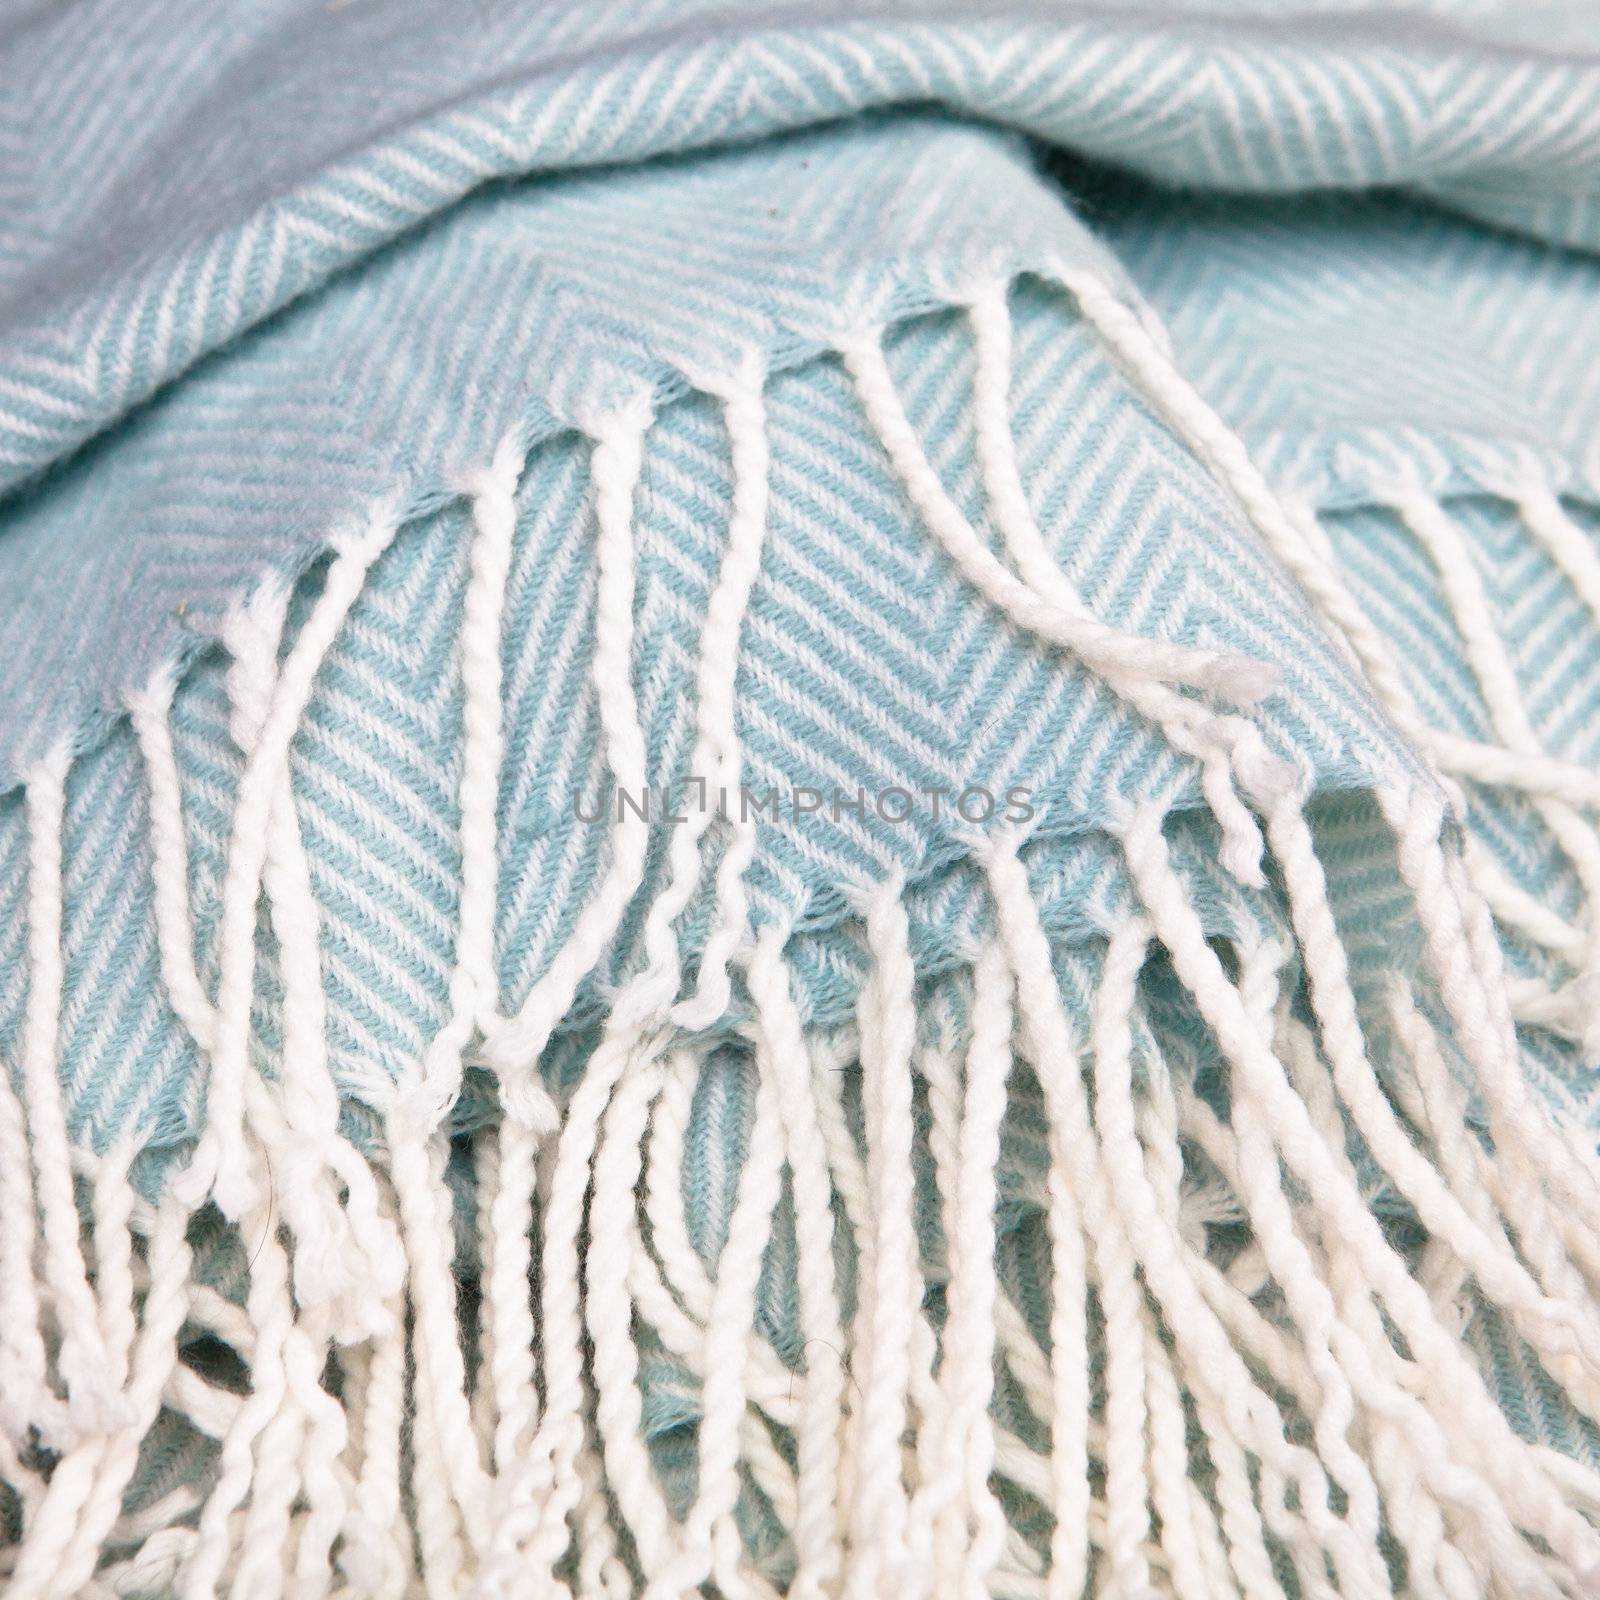 Close up of the tassles of a soft fluffy blanket